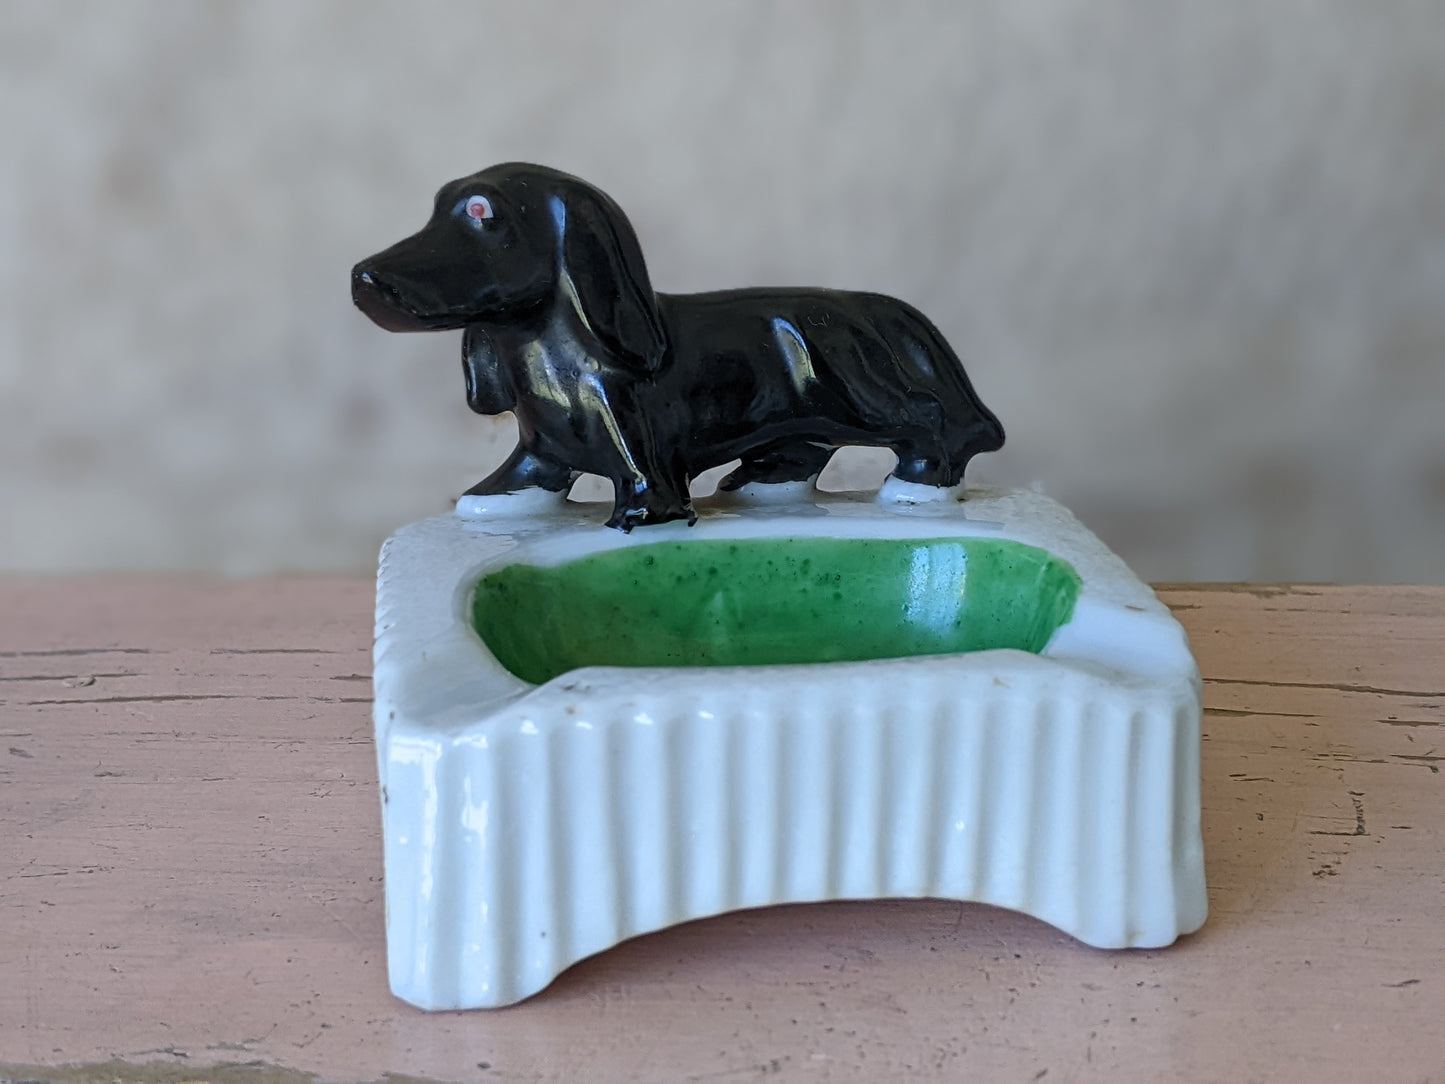 1950s Dachshund Charming Ashtray !! Rare !! Hand-Painted Porcelain Japan !! Awesome Unusual Gifts !! Retro Style Gift Ideas !!